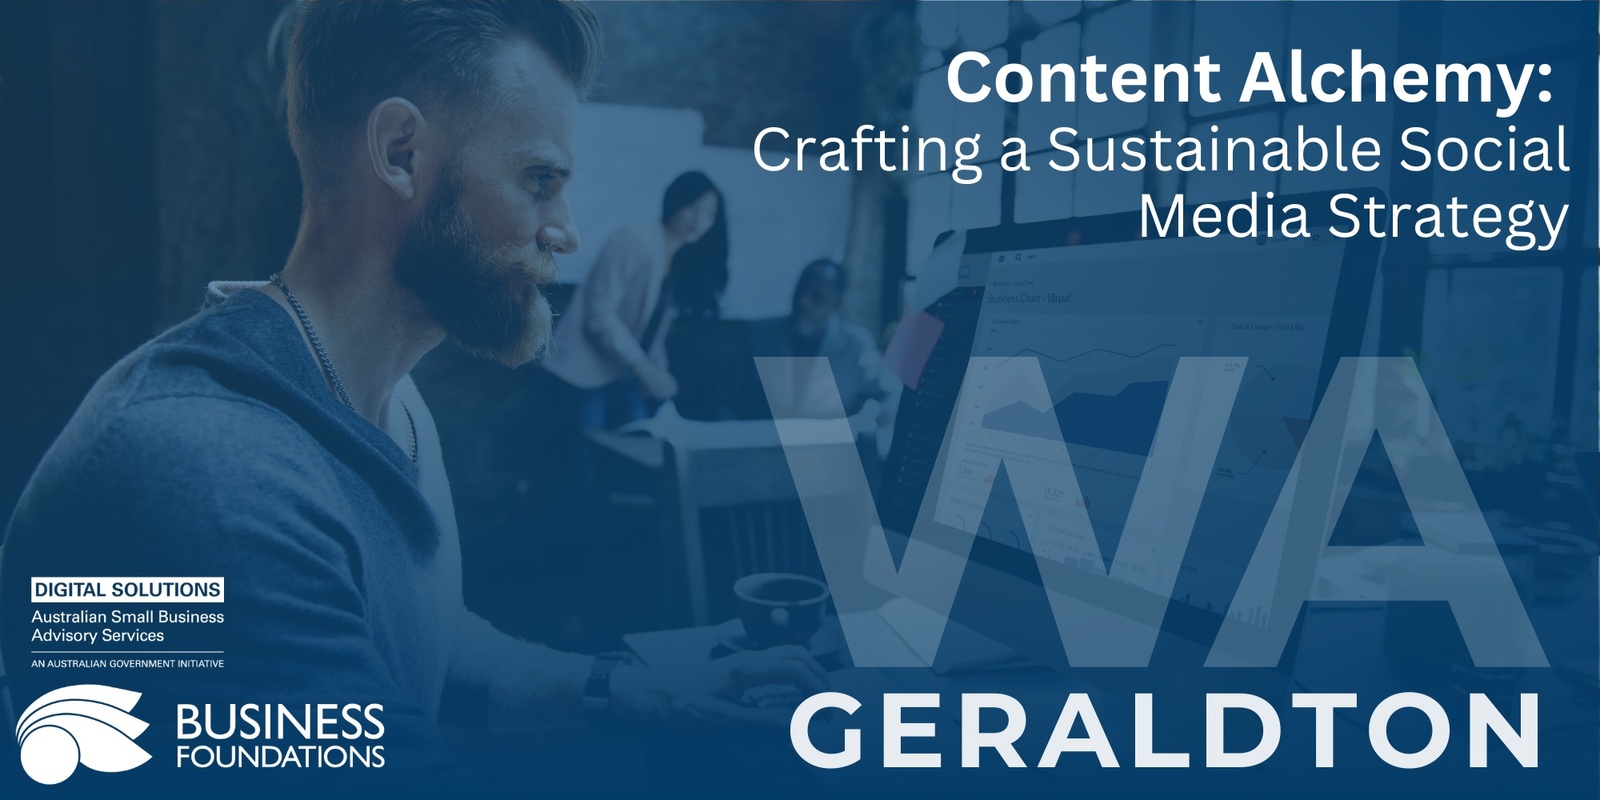 Banner image for Content Alchemy: Crafting a Sustainable Social Media Strategy - Geraldton